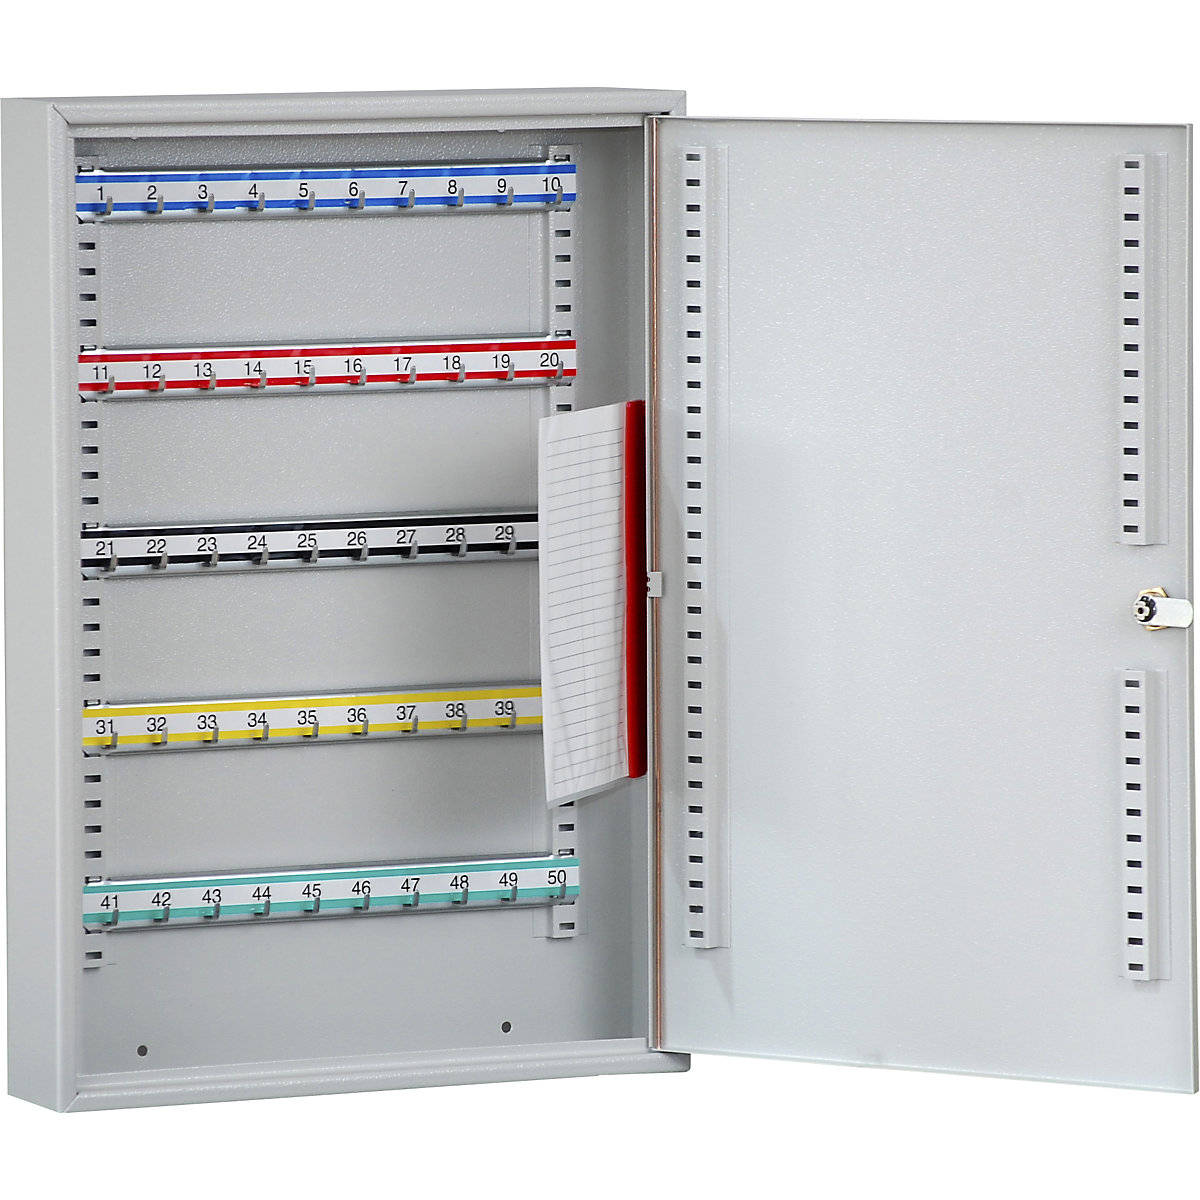 Security key cabinets